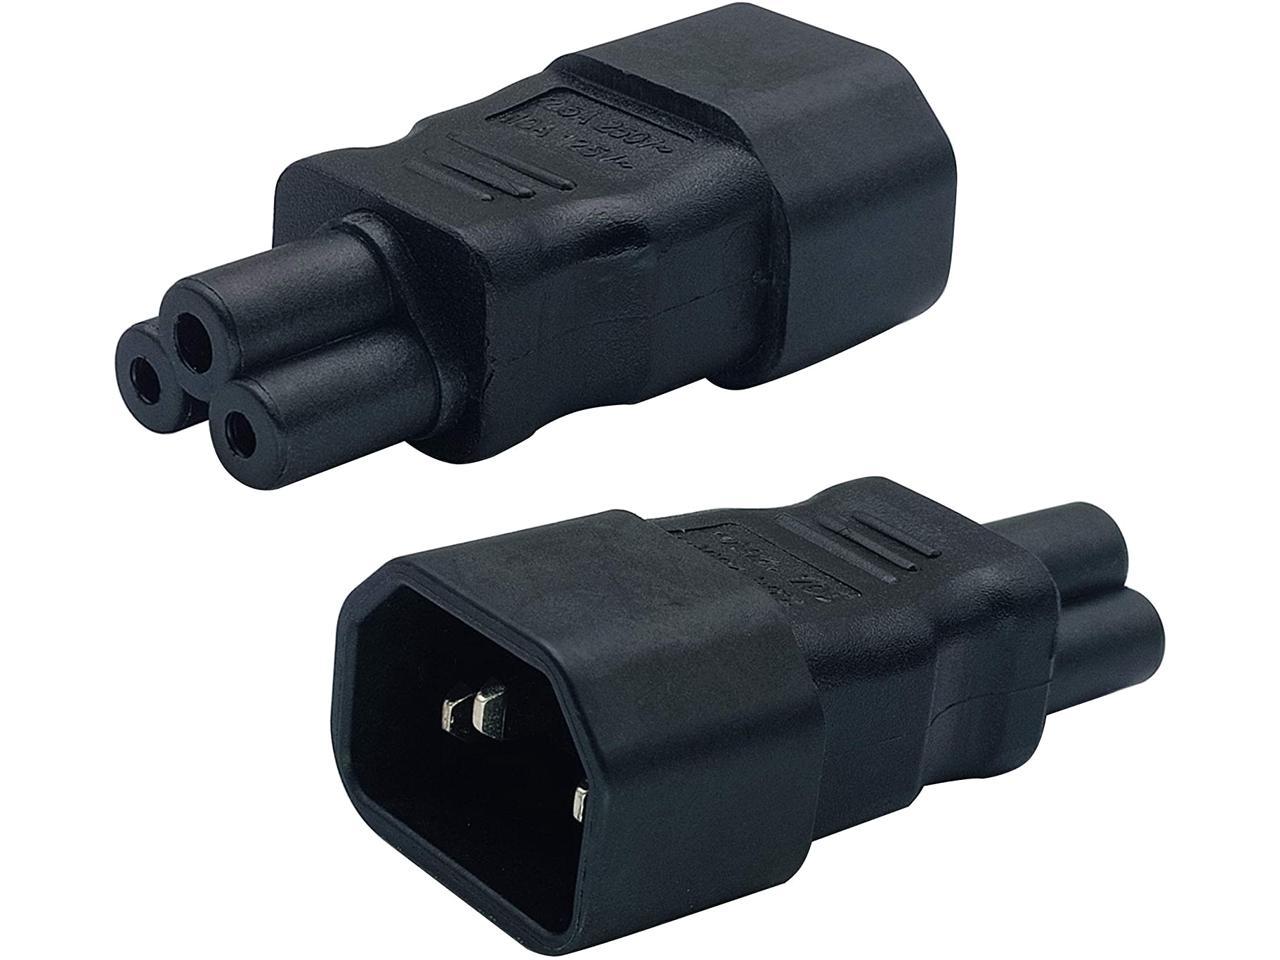 Kentek 6 Feet Ft US 3 Prongs AC Power Cord IEC320 C5 to UK England BS1363 3 prongs AC Outlet Cable with Fuse 18 AWG Black International Travel